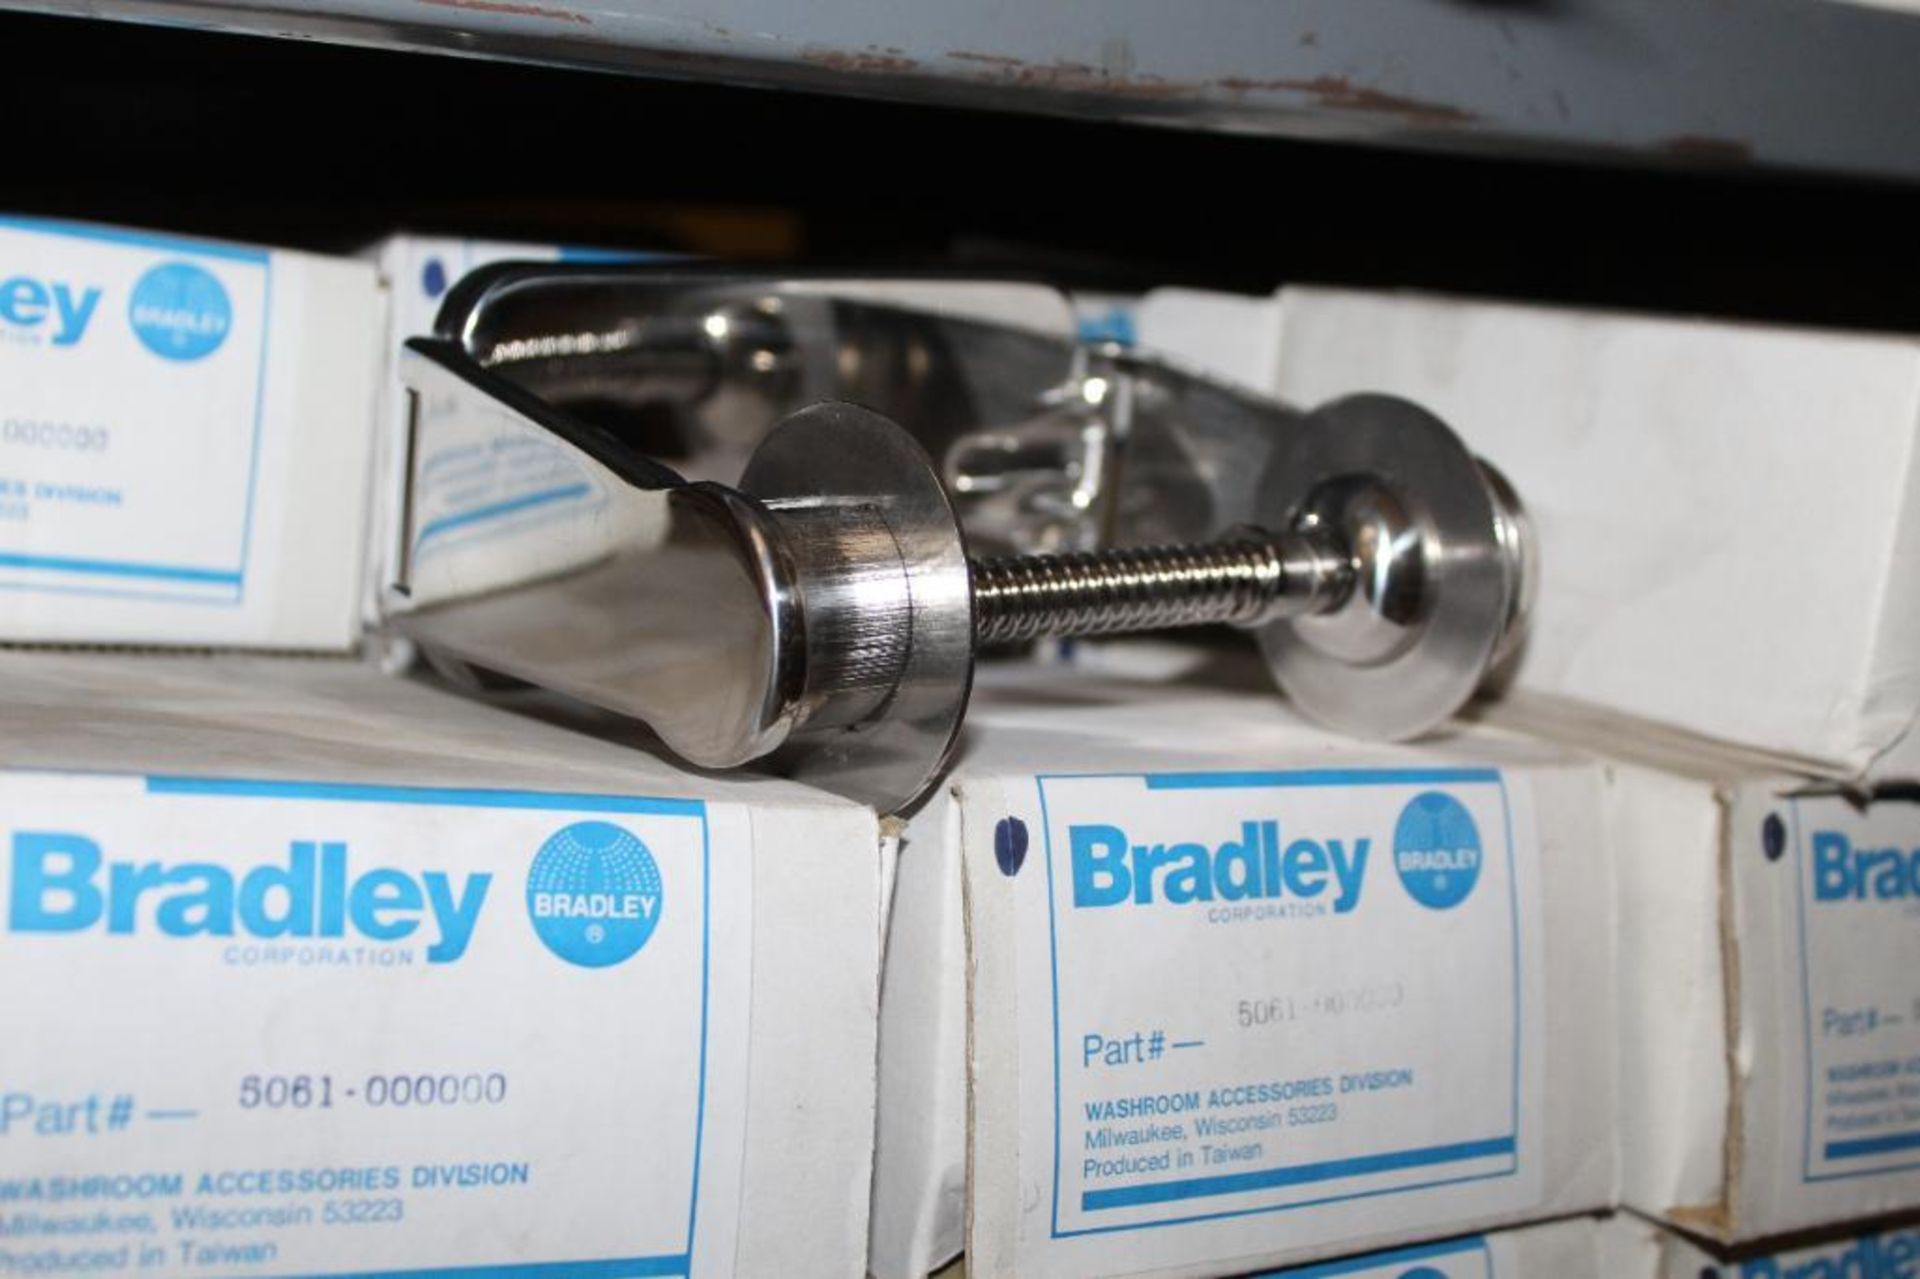 Lot of Bradley Model 5061 and Georgia Pacific 9" Jumbo Tissue Dispensers - Image 4 of 4